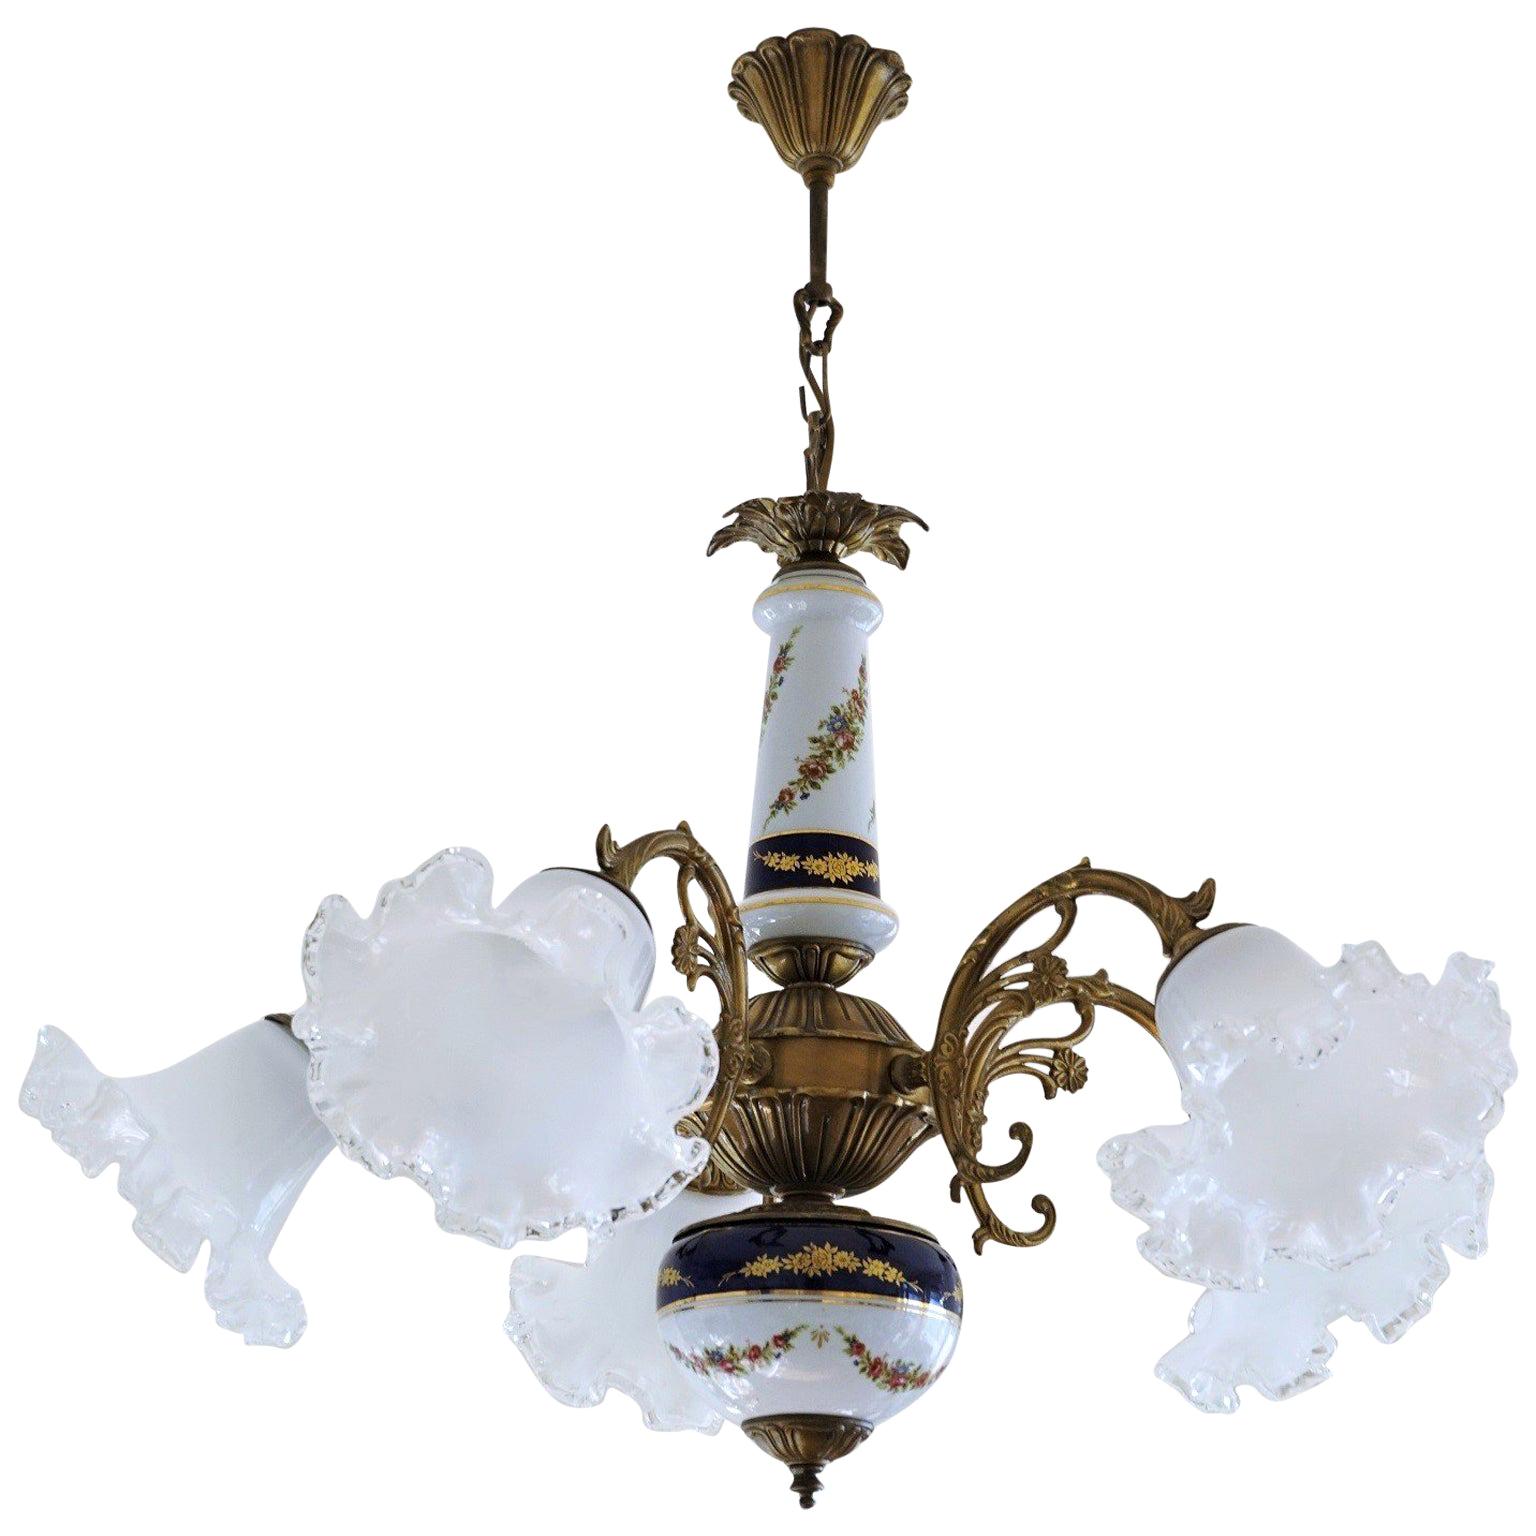 Midcentury French Limoges Porcelain and Murano Glass Five-Light Chandelier